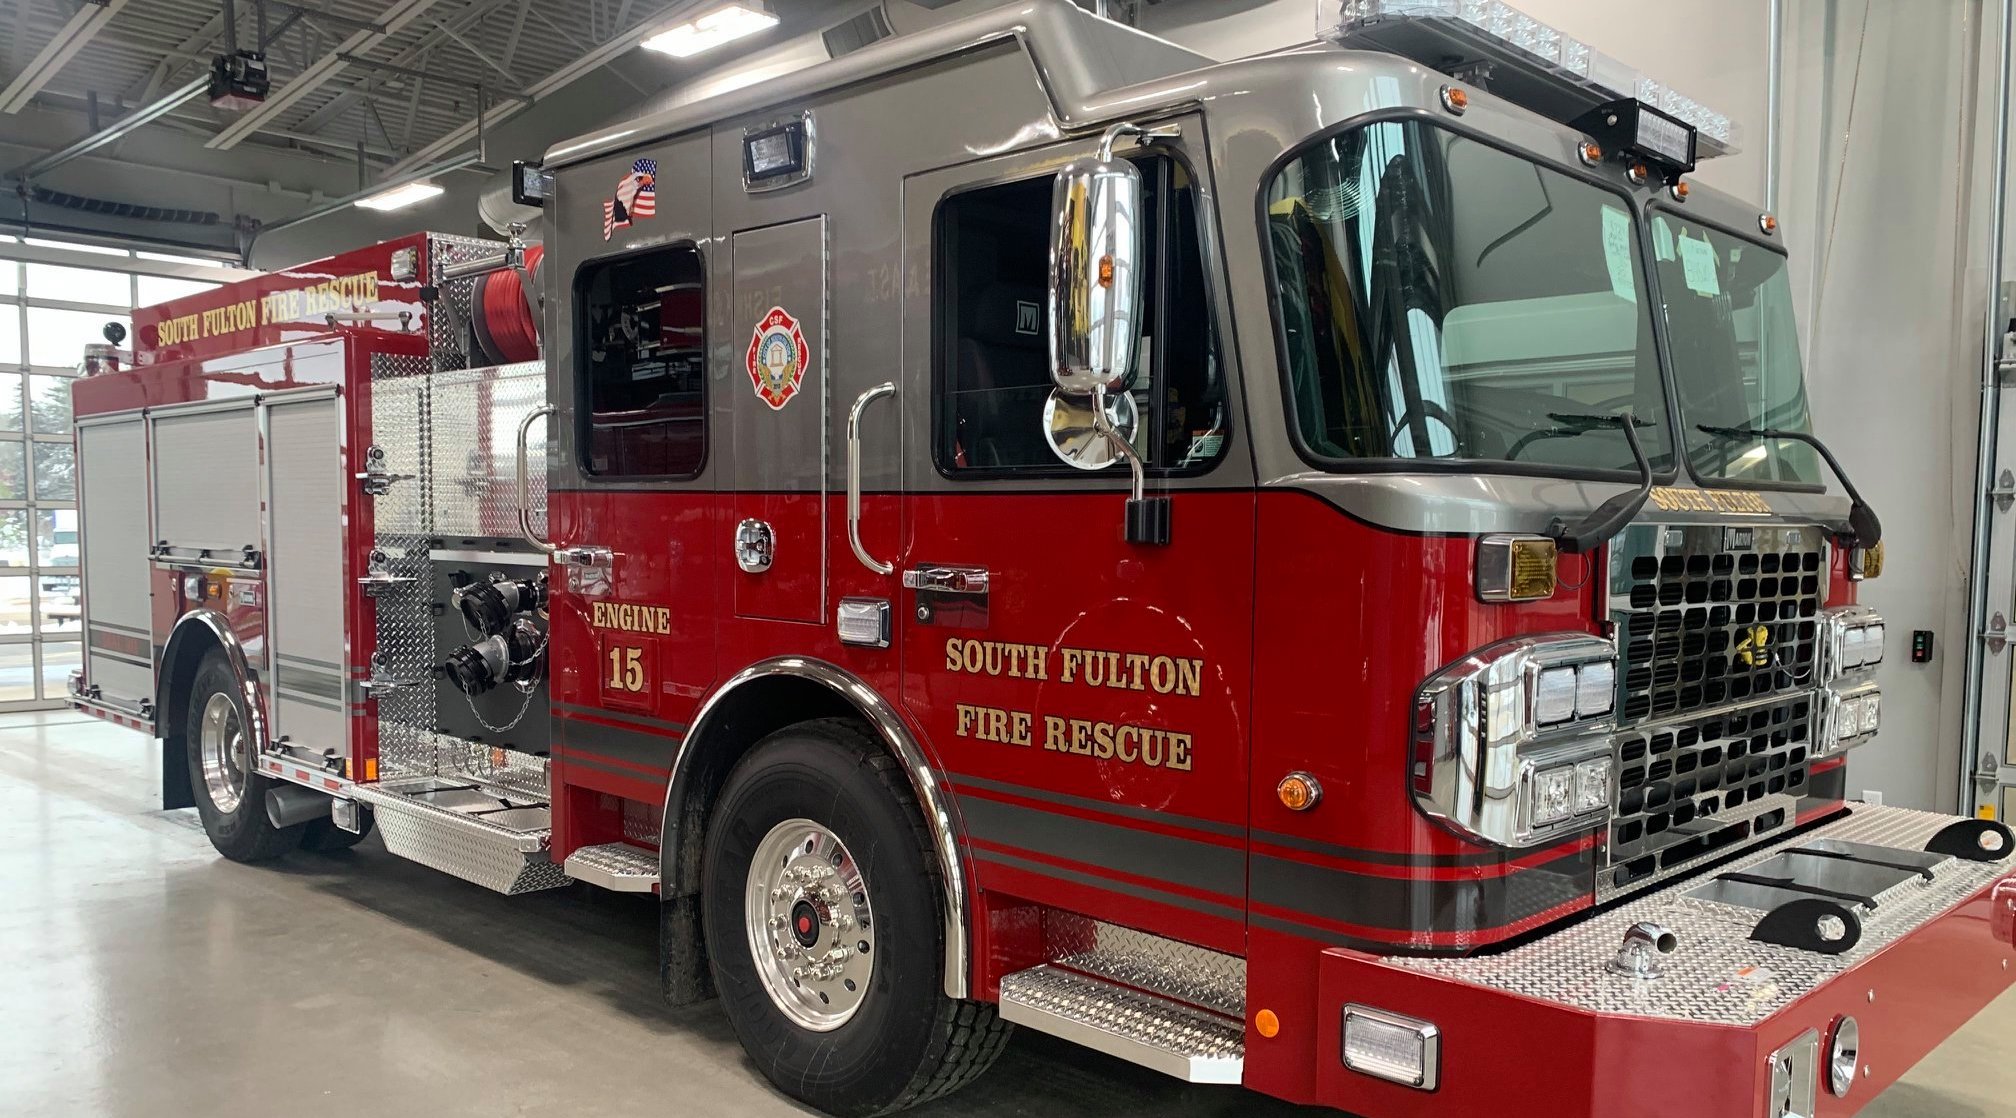 South Fulton Fire Department to Celebrate Fleet Expansion with Ceremony on Jan. 27